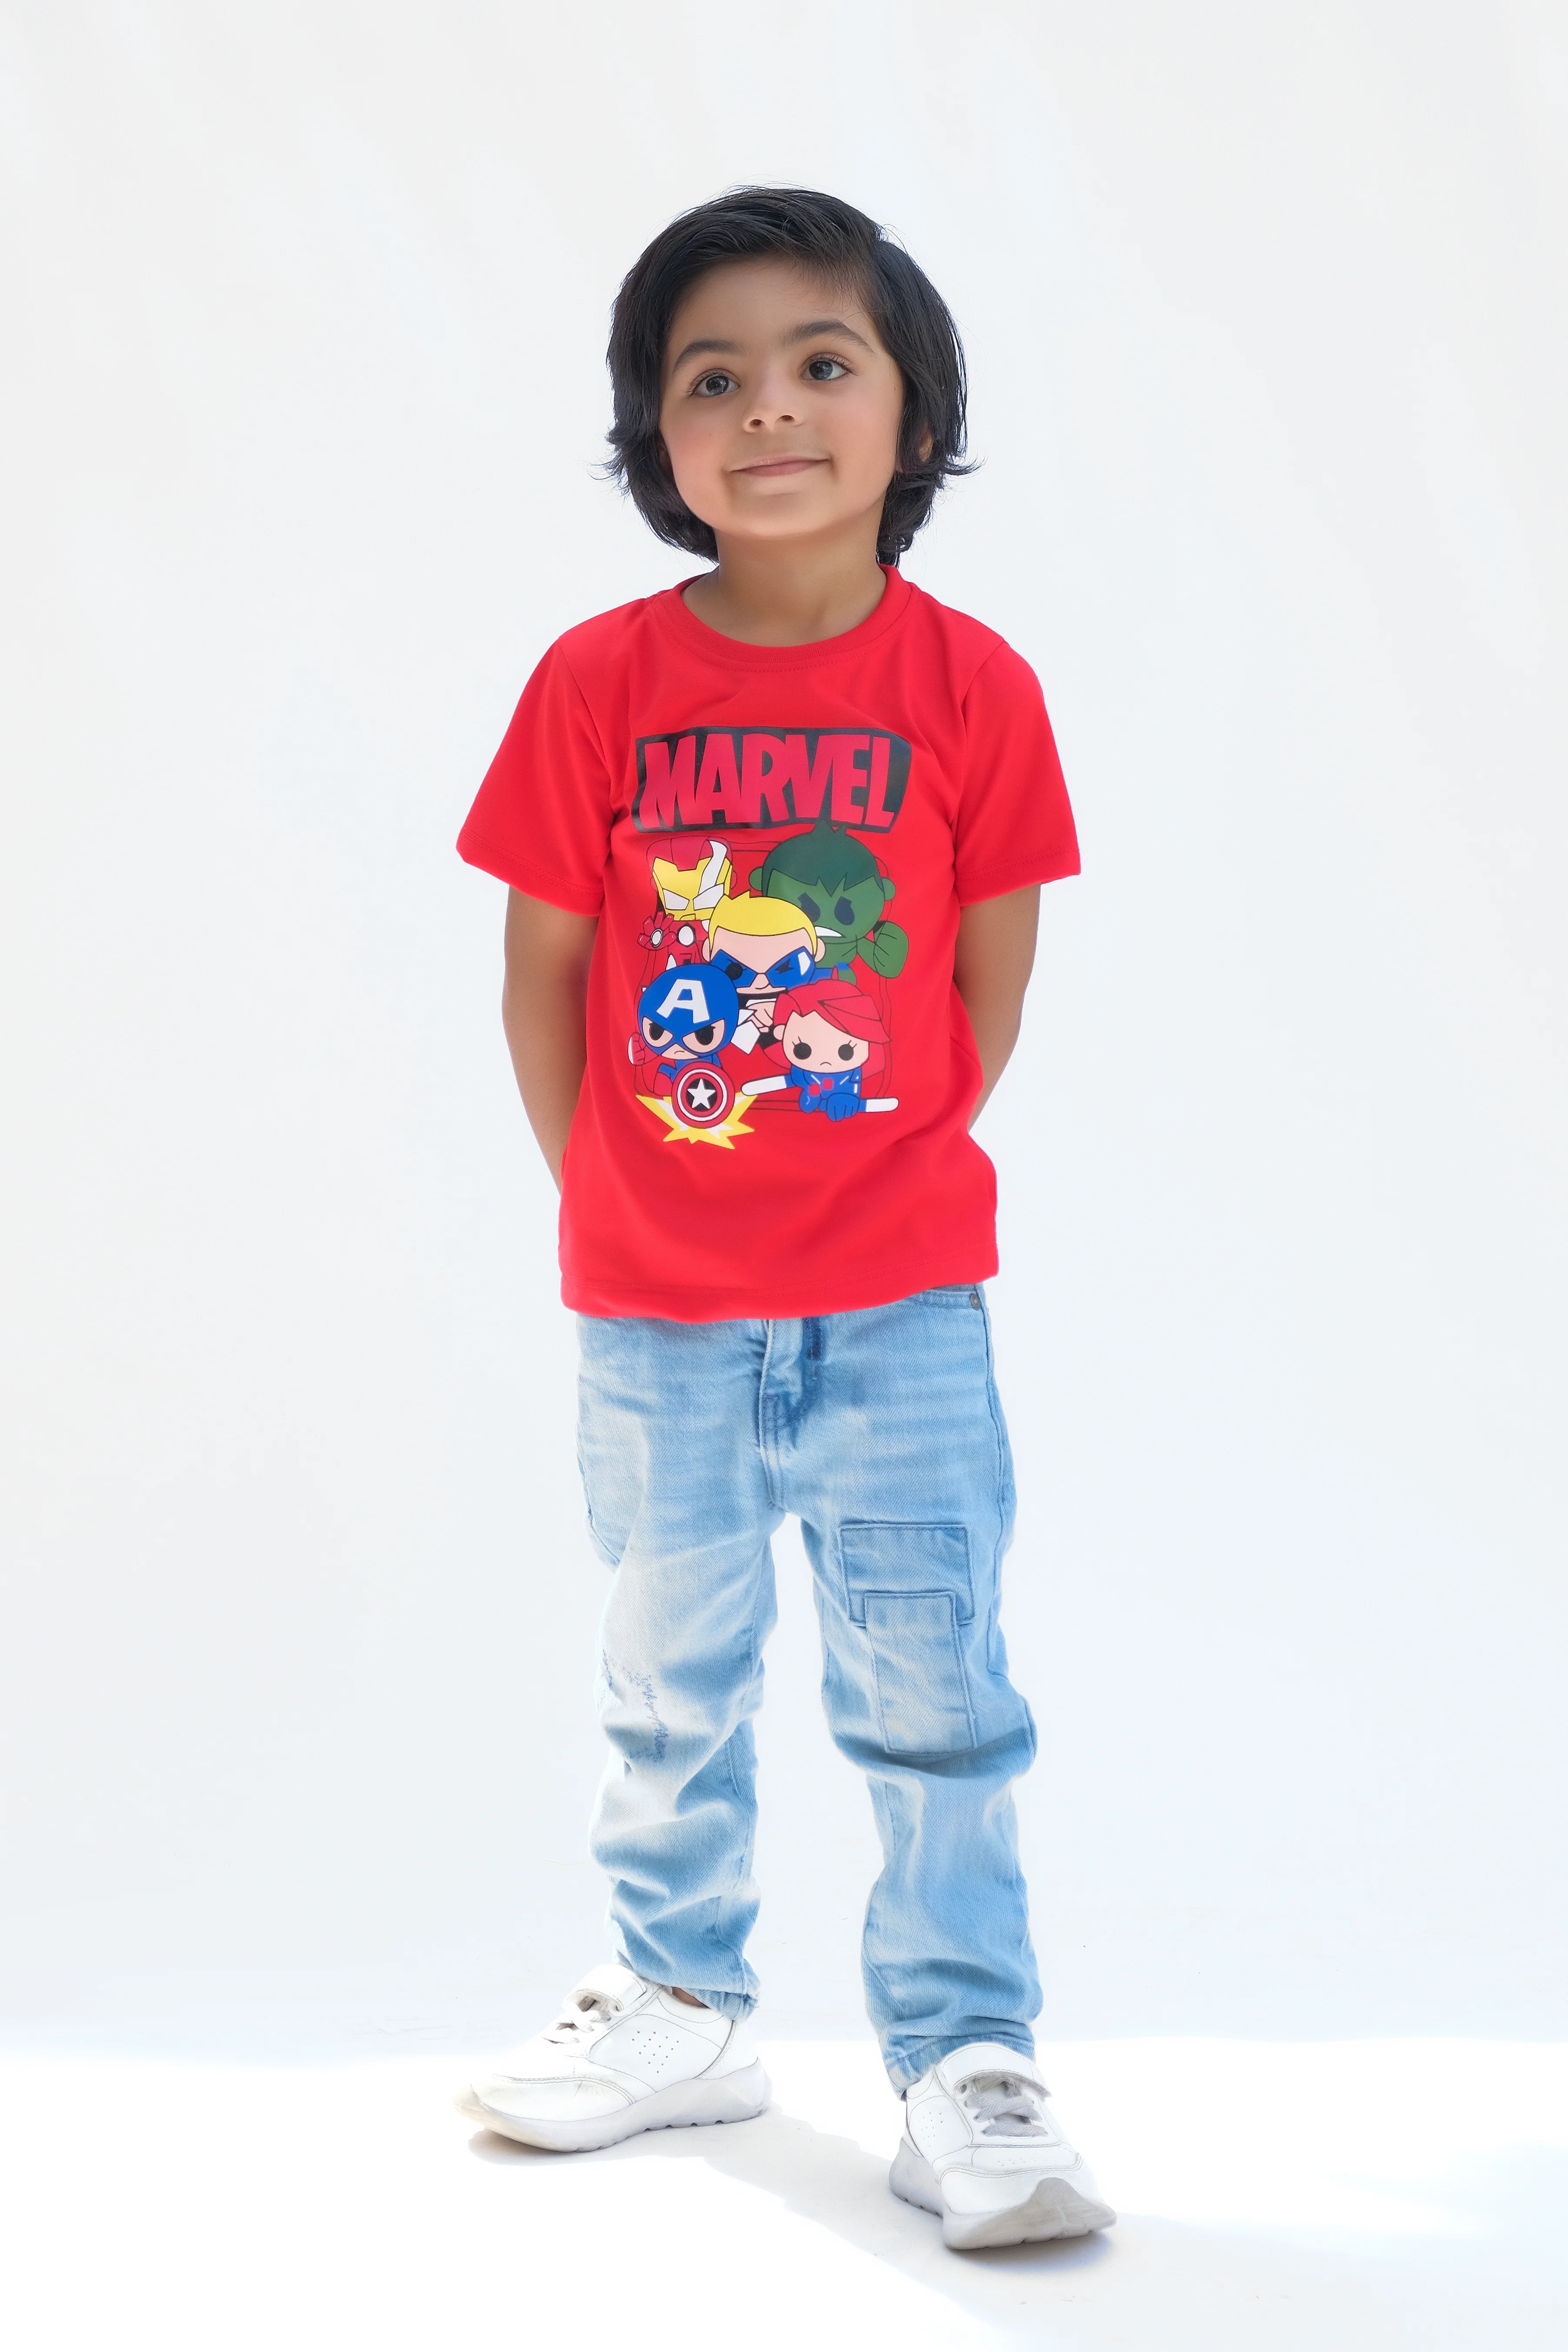 Marvel Half Sleeves T-Shirts For Kids - Red - SBT-334